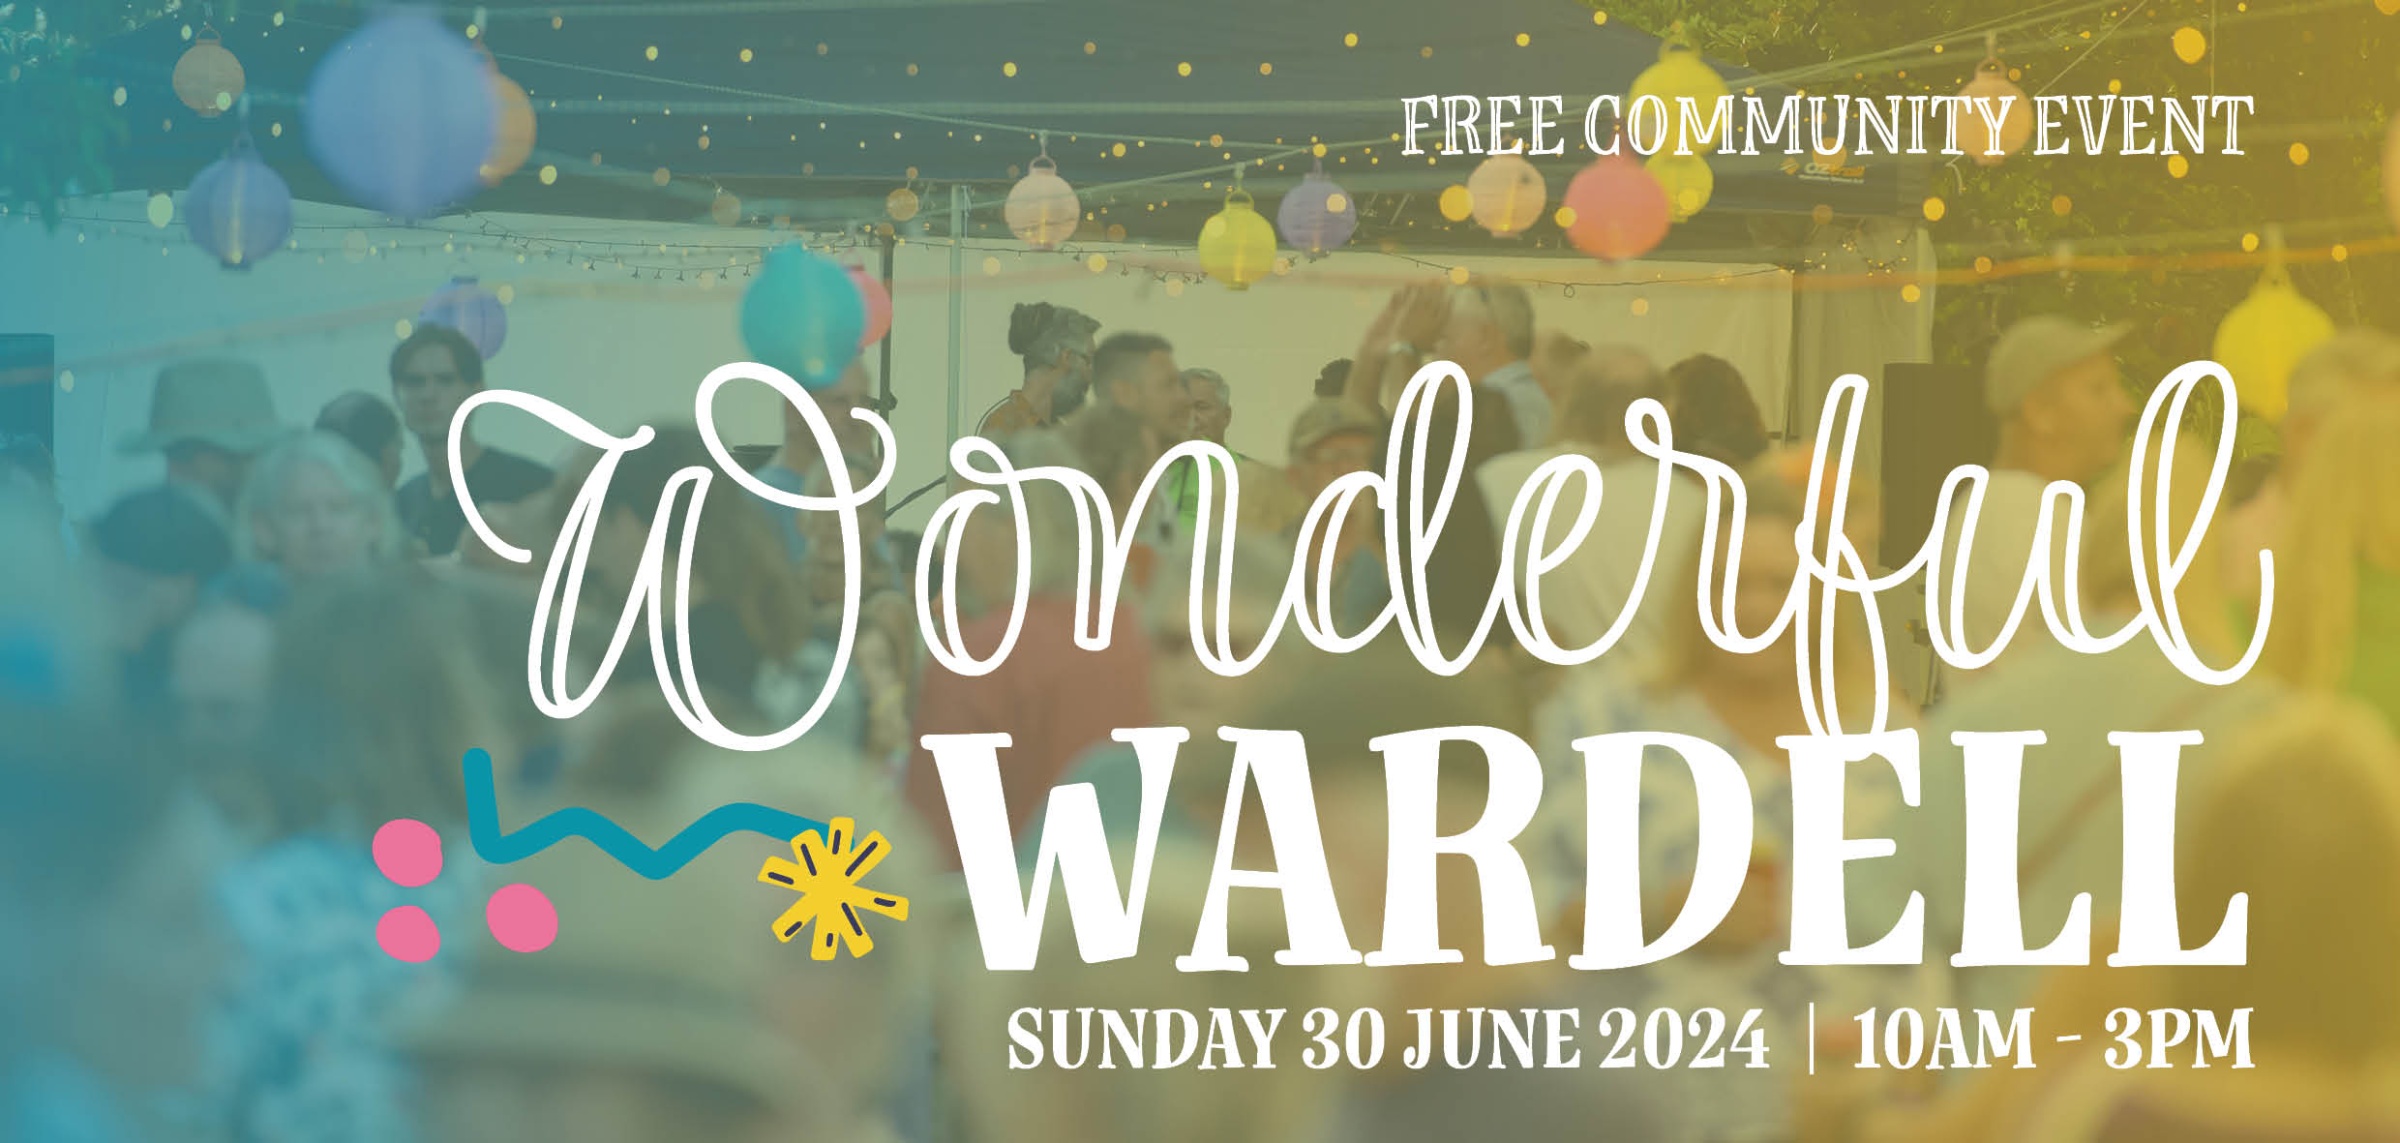 Wonderful Wardell - a day to connect, play and get creative